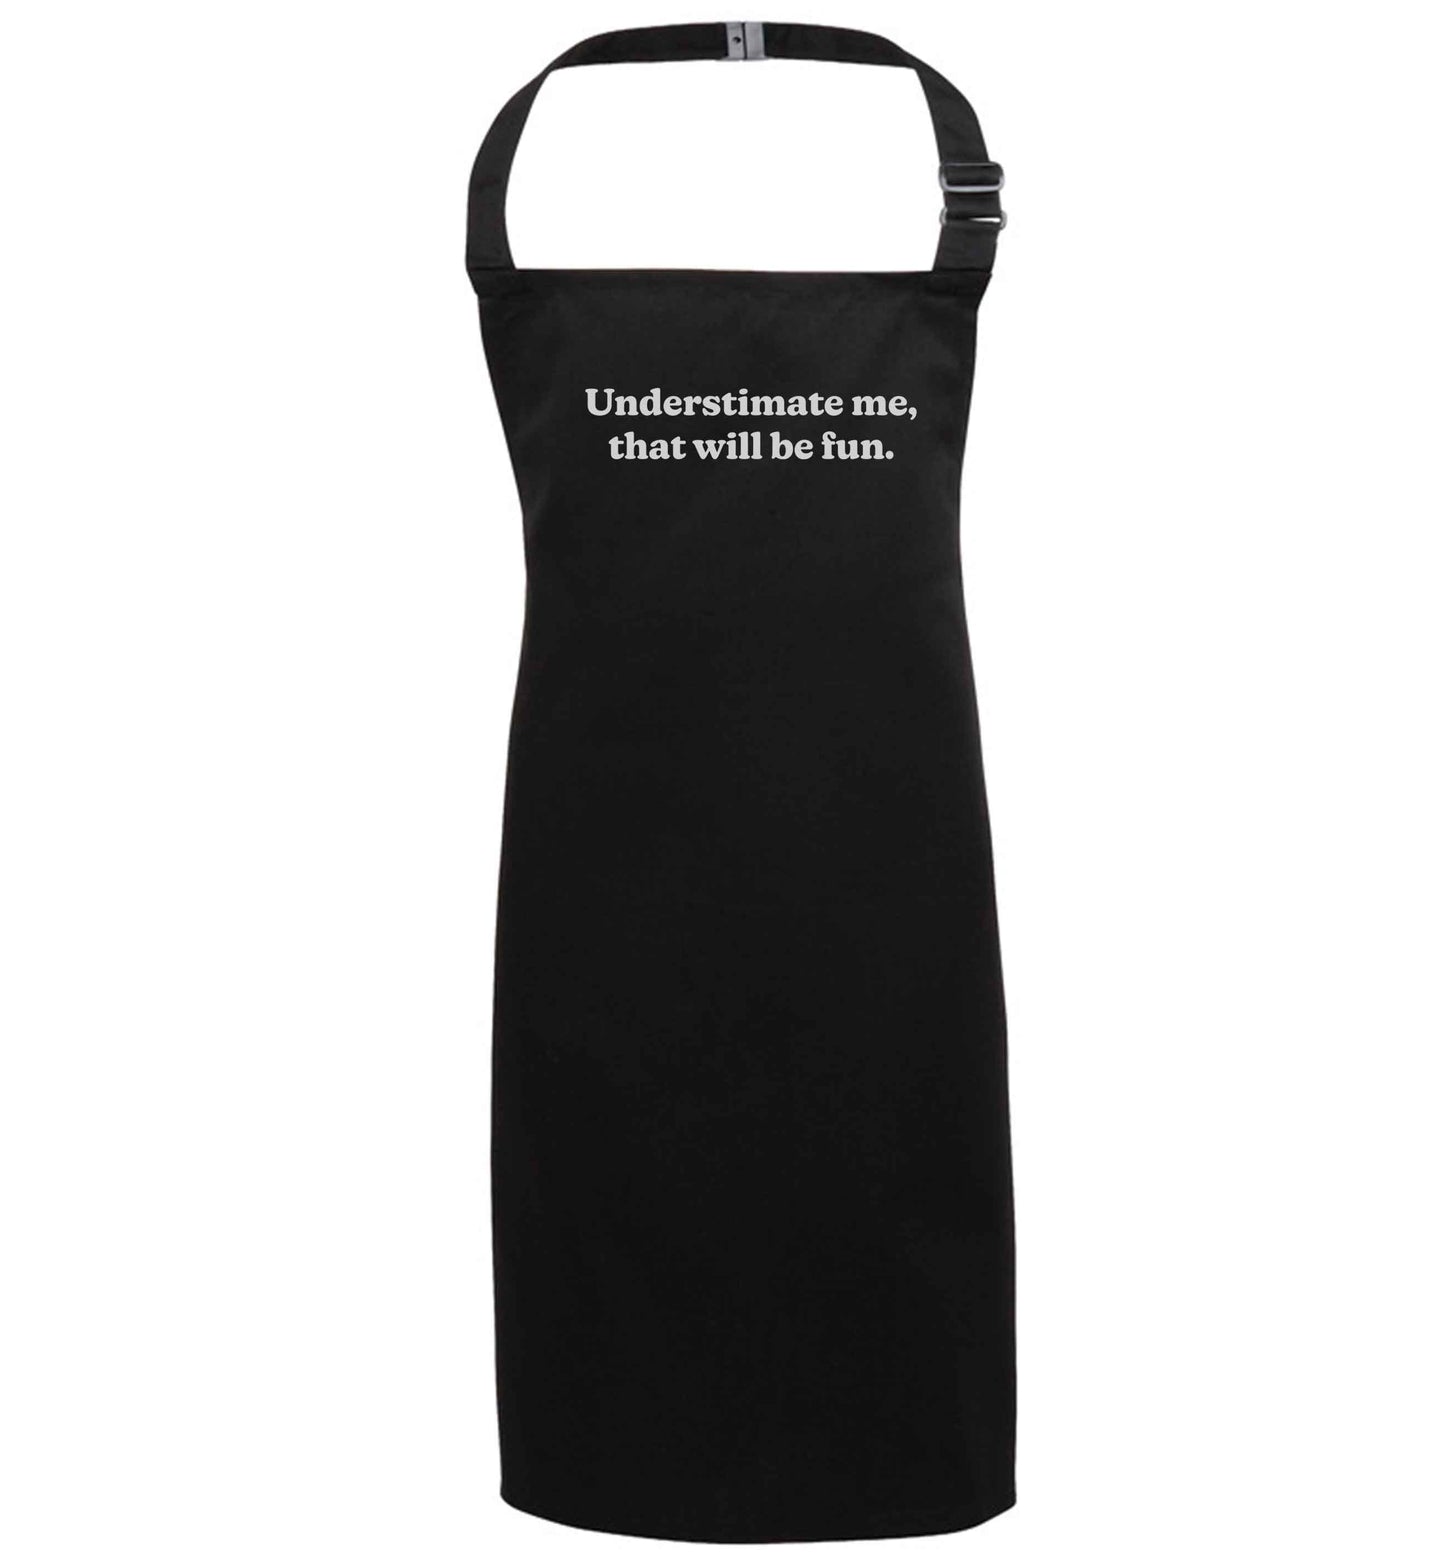 Underestimate me that will be fun black apron 7-10 years